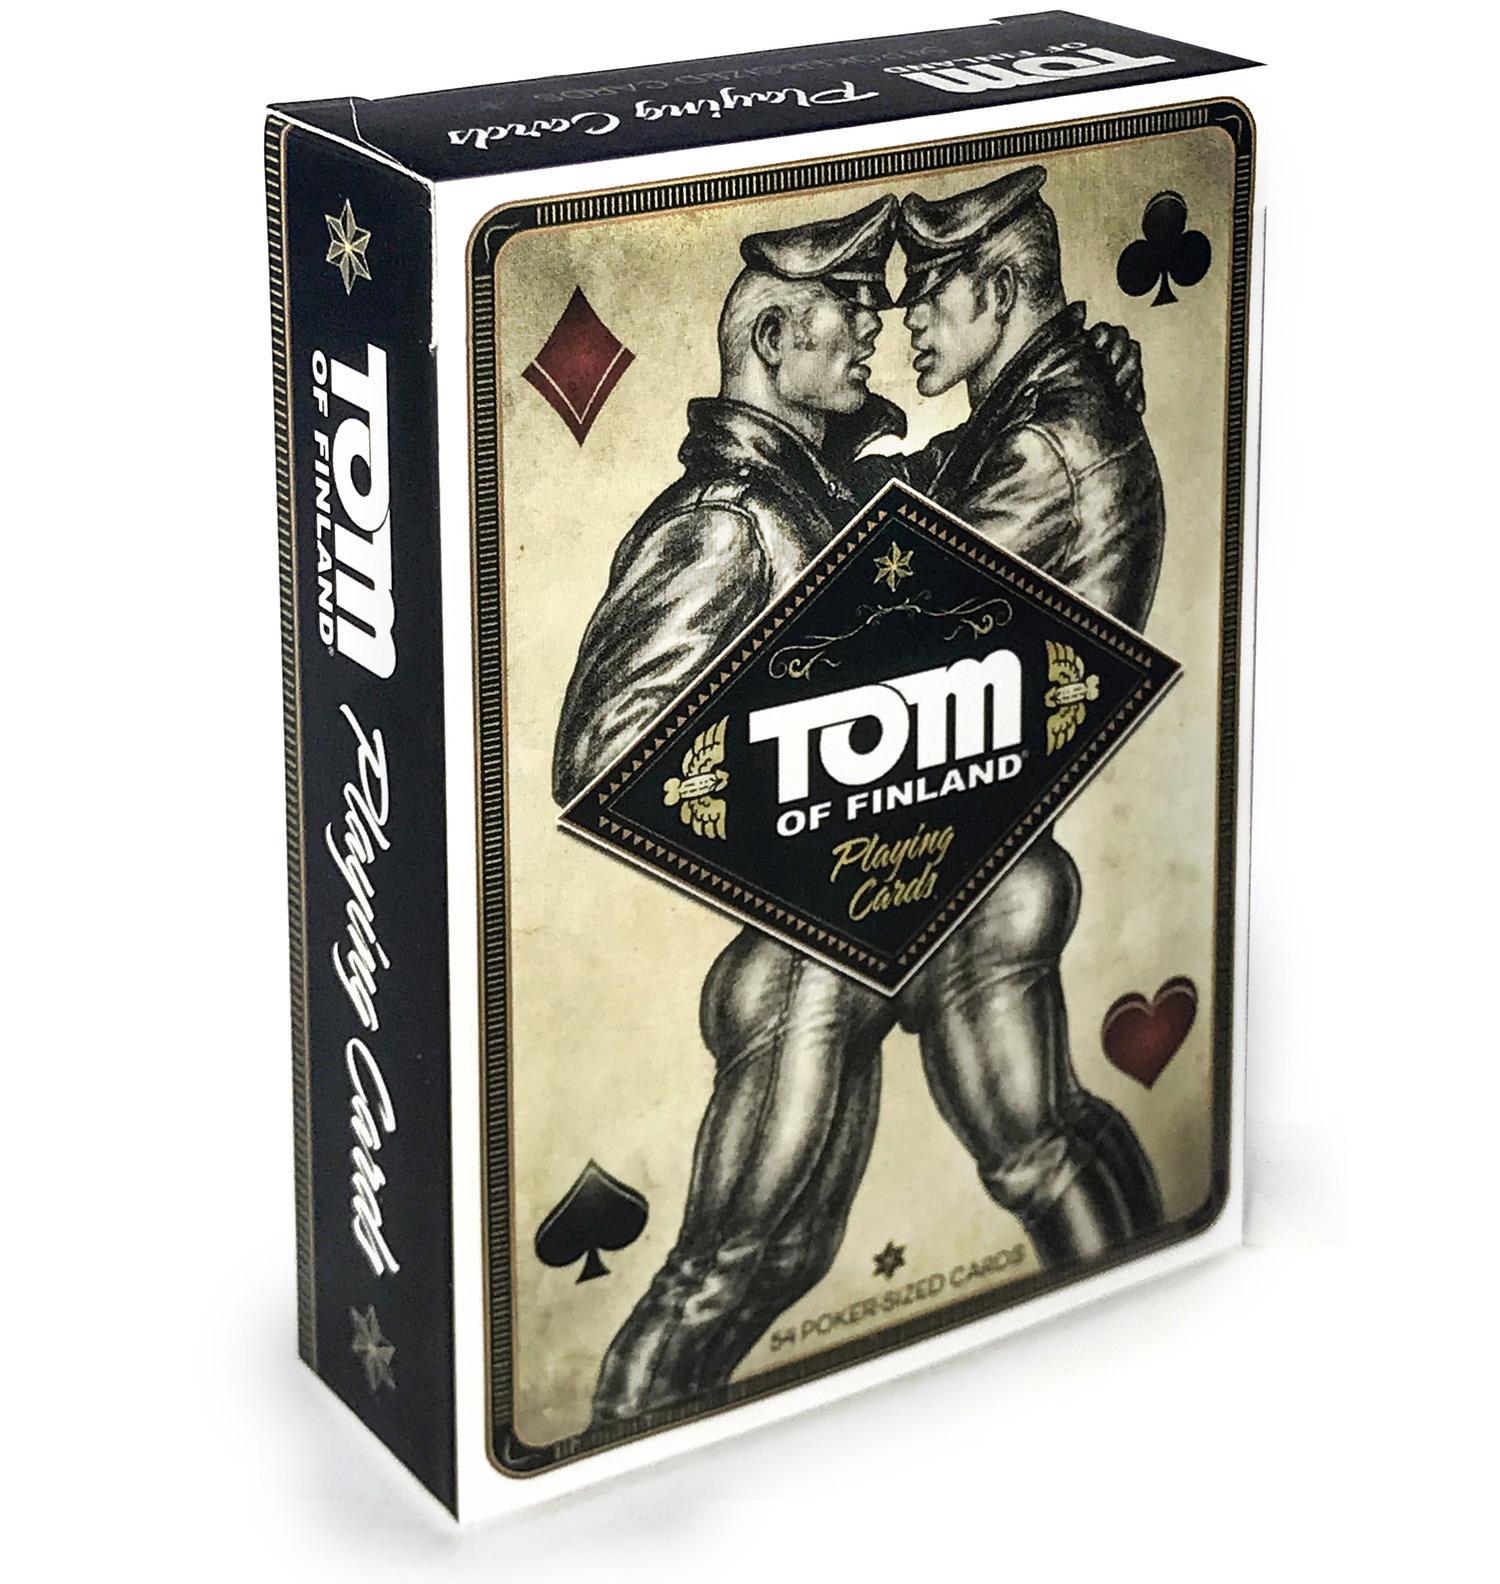 interview-about-our-tom-of-finland-poker-cards-gay-greeting-cards-by-kweer-cards